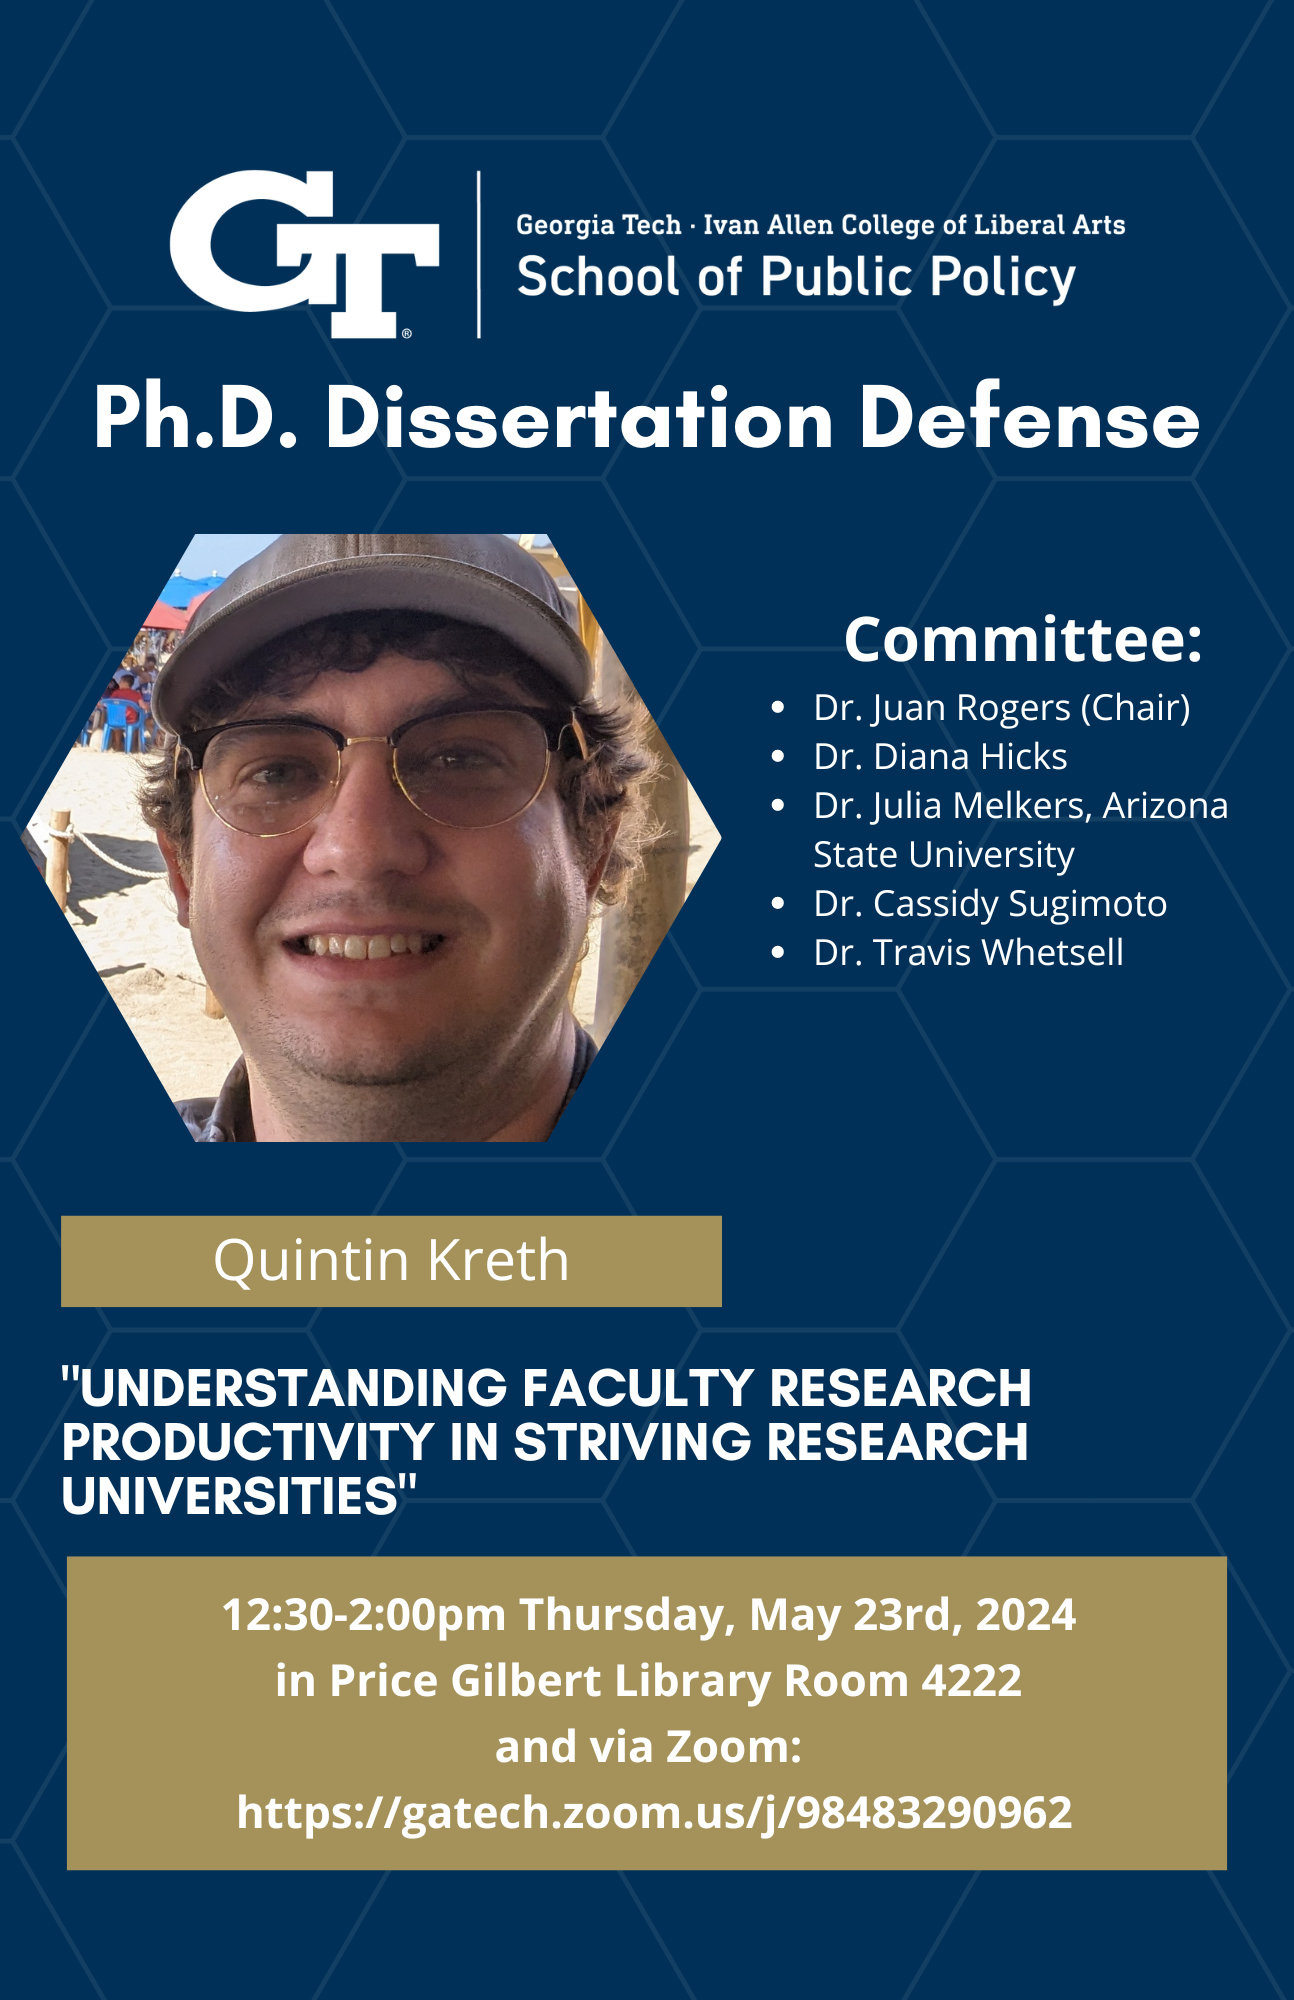 Quintin Kreth, Committee: Dr. Juan Rogers (chair), Dr. Diana Hicks, Dr. Julia Melkers (Arizona State University), Dr. Cassidy Sugimoto, Dr. Travis Whetsell,"Understanding Faculty Research Productivity in Striving Research Universities"  12:30-2:00PM Thursday May 23rd, 2024  Price Gilbert Library Room 4222 and Via Zoom: https://gatech.zoom.us/j/98483290962 